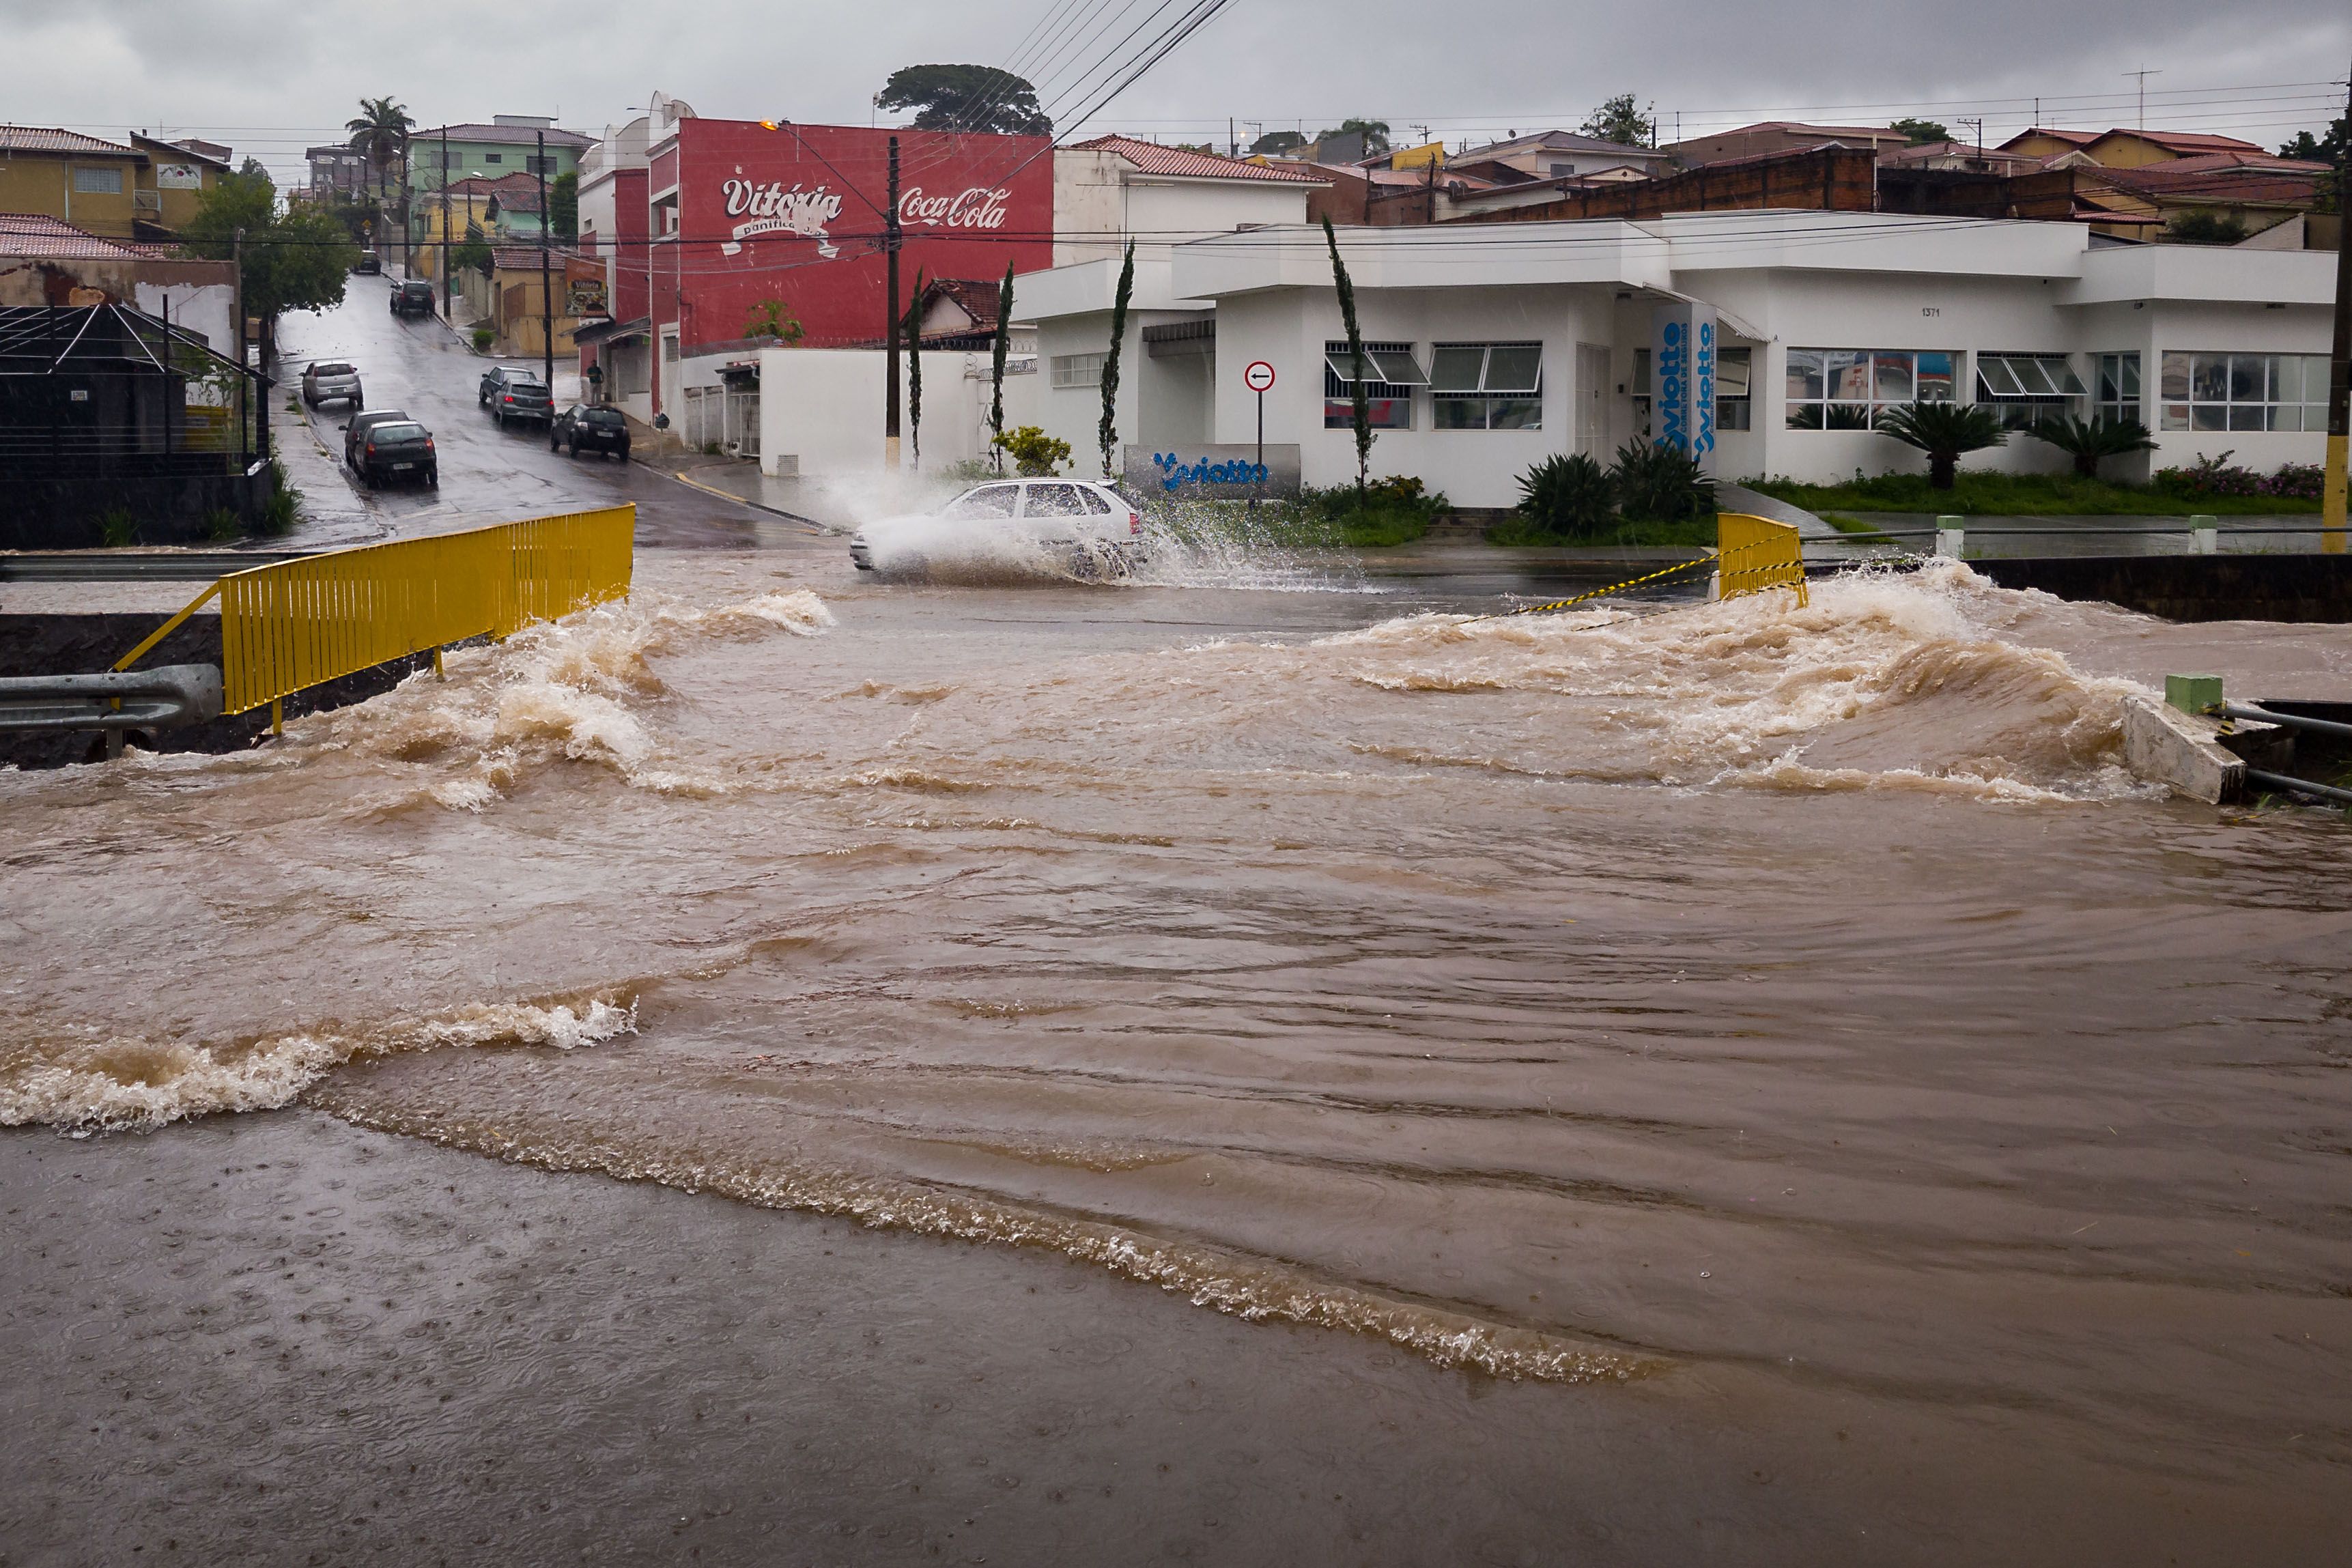 Flooding point on Antonio Barbosa Filho avenue, in Franca, Sao Paulo, Brazil, after a storm on 22 January 